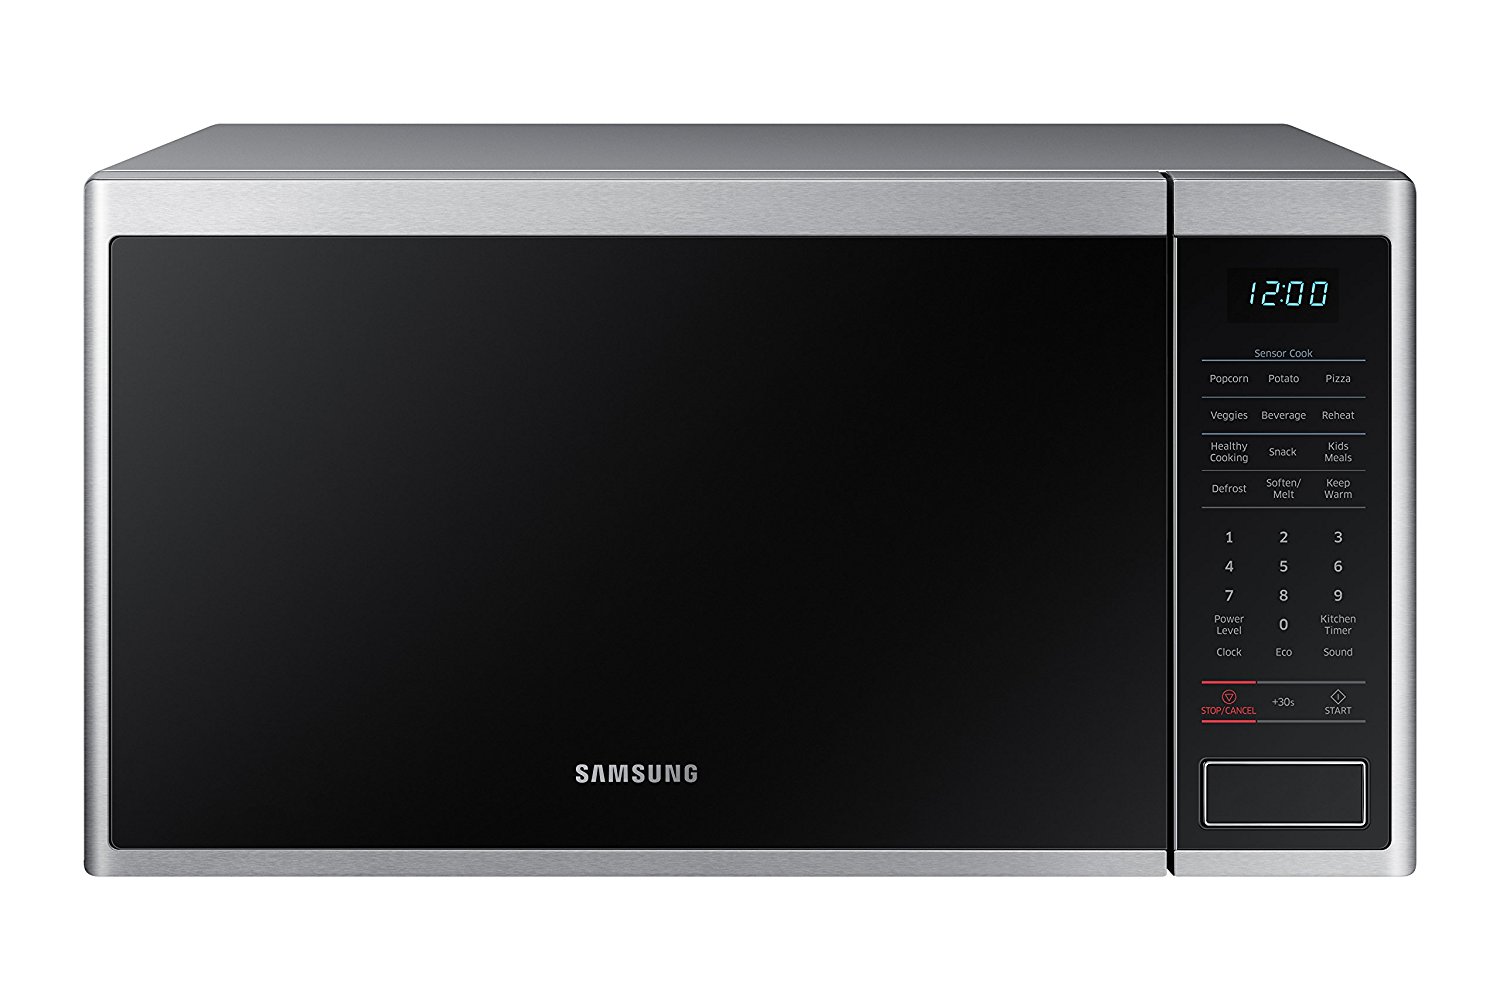 Samsung MS14K6000AS 1.4 cu. ft. Countertop Microwave Oven with Sensor and Ceramic Enamel Interior, Stainless Steel